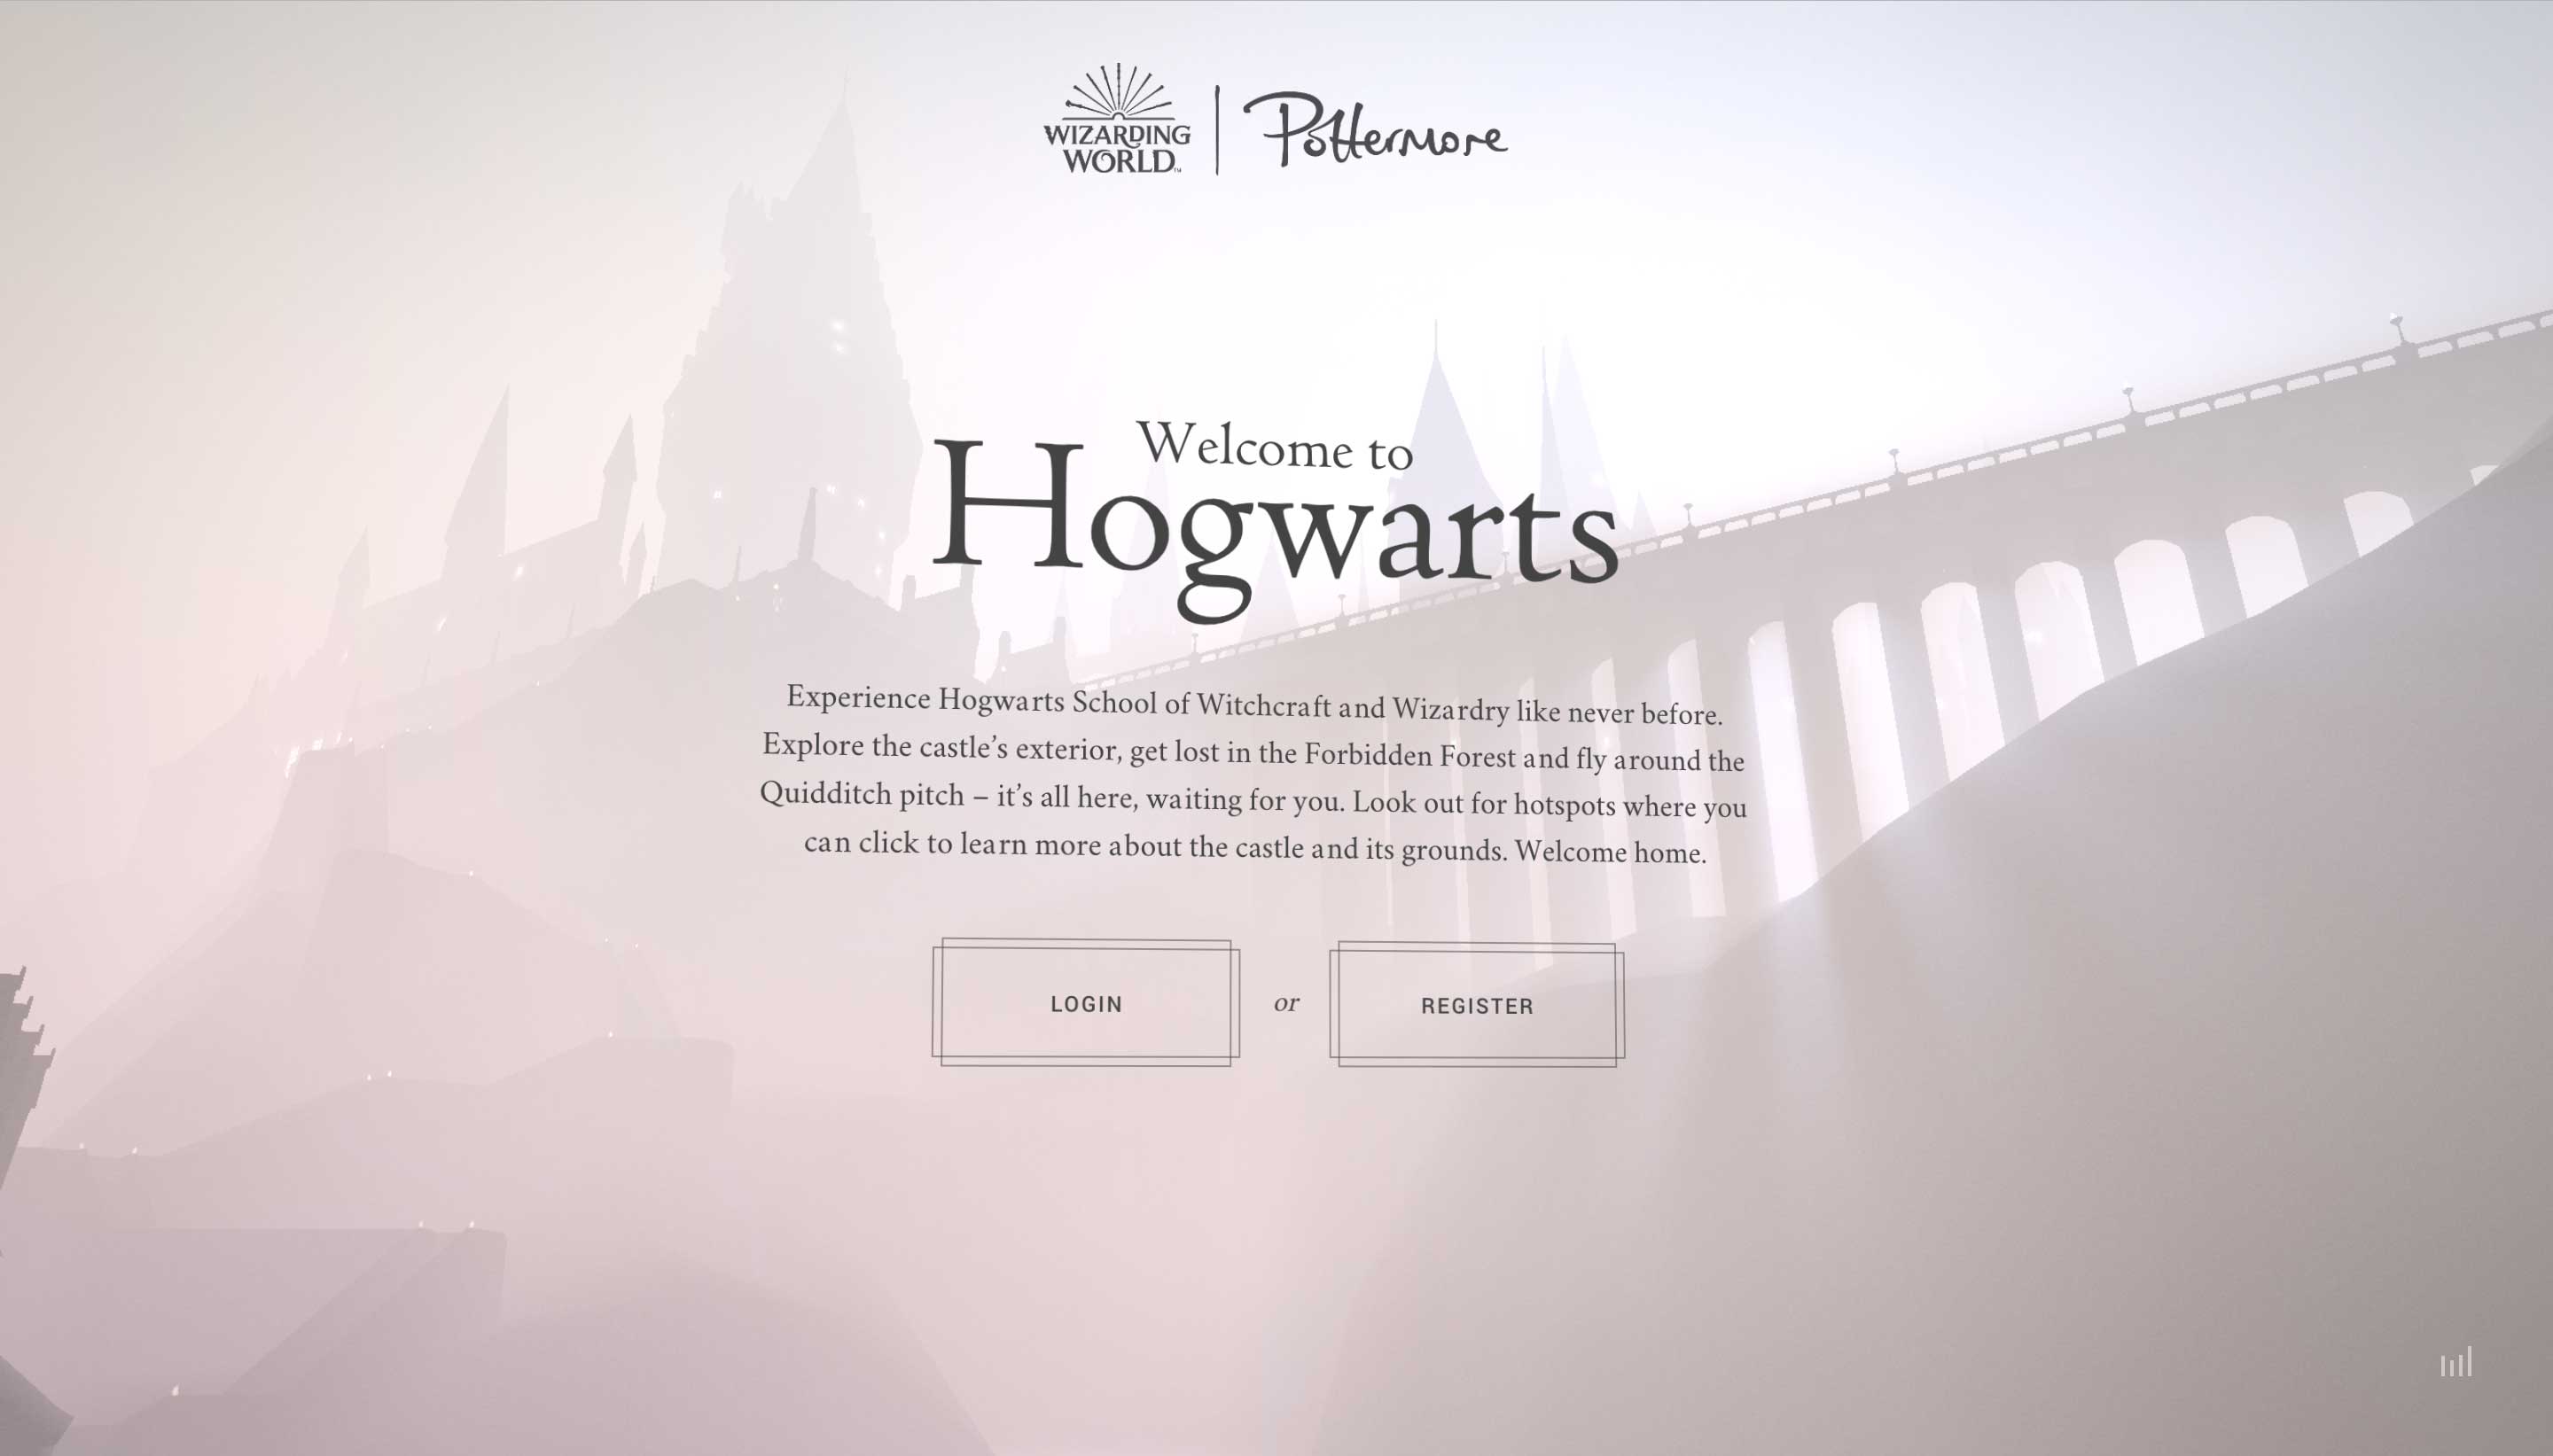 Hogwarts Experience on Pottermore